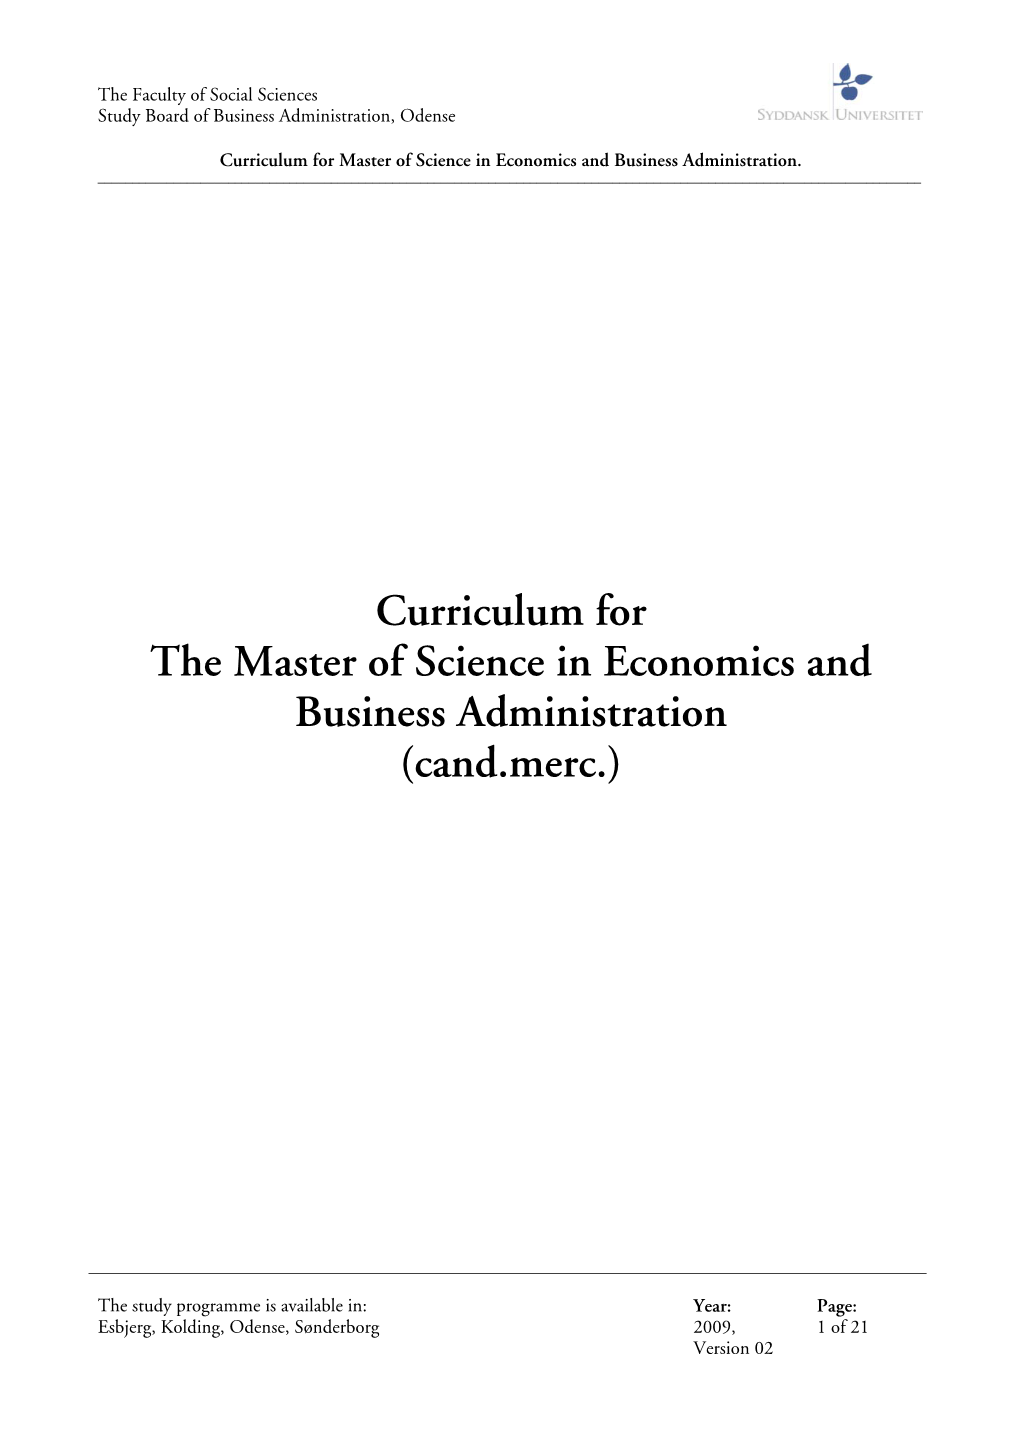 Curriculum for the Master of Science in Economics and Business Administration (Cand.Merc.)